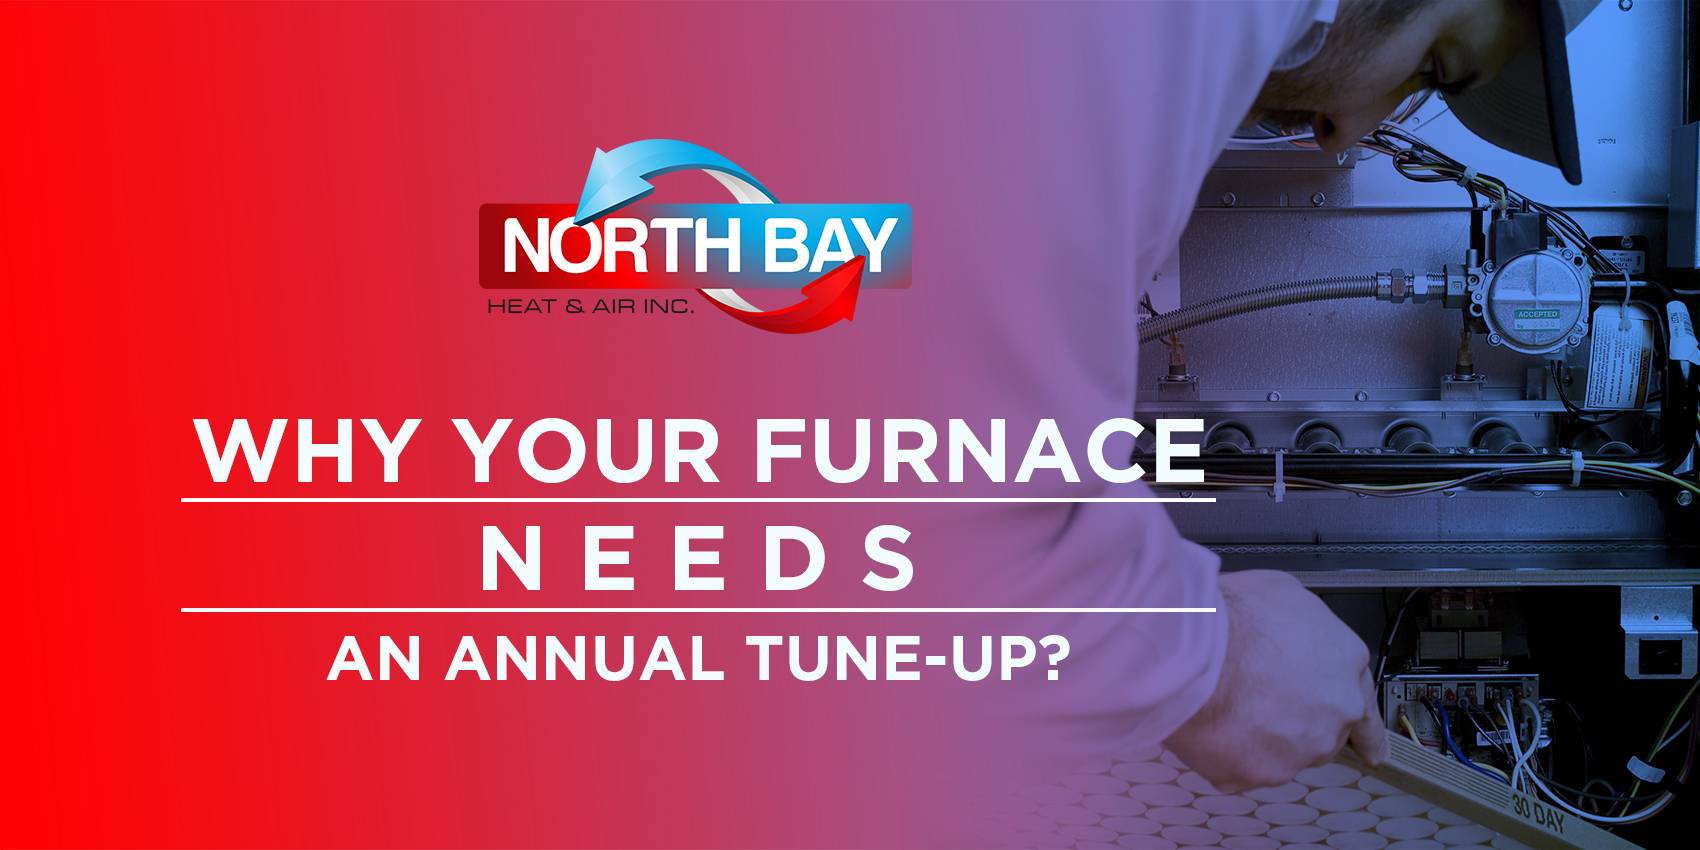 Why Your Furnace Needs An Annual Tune-Up?